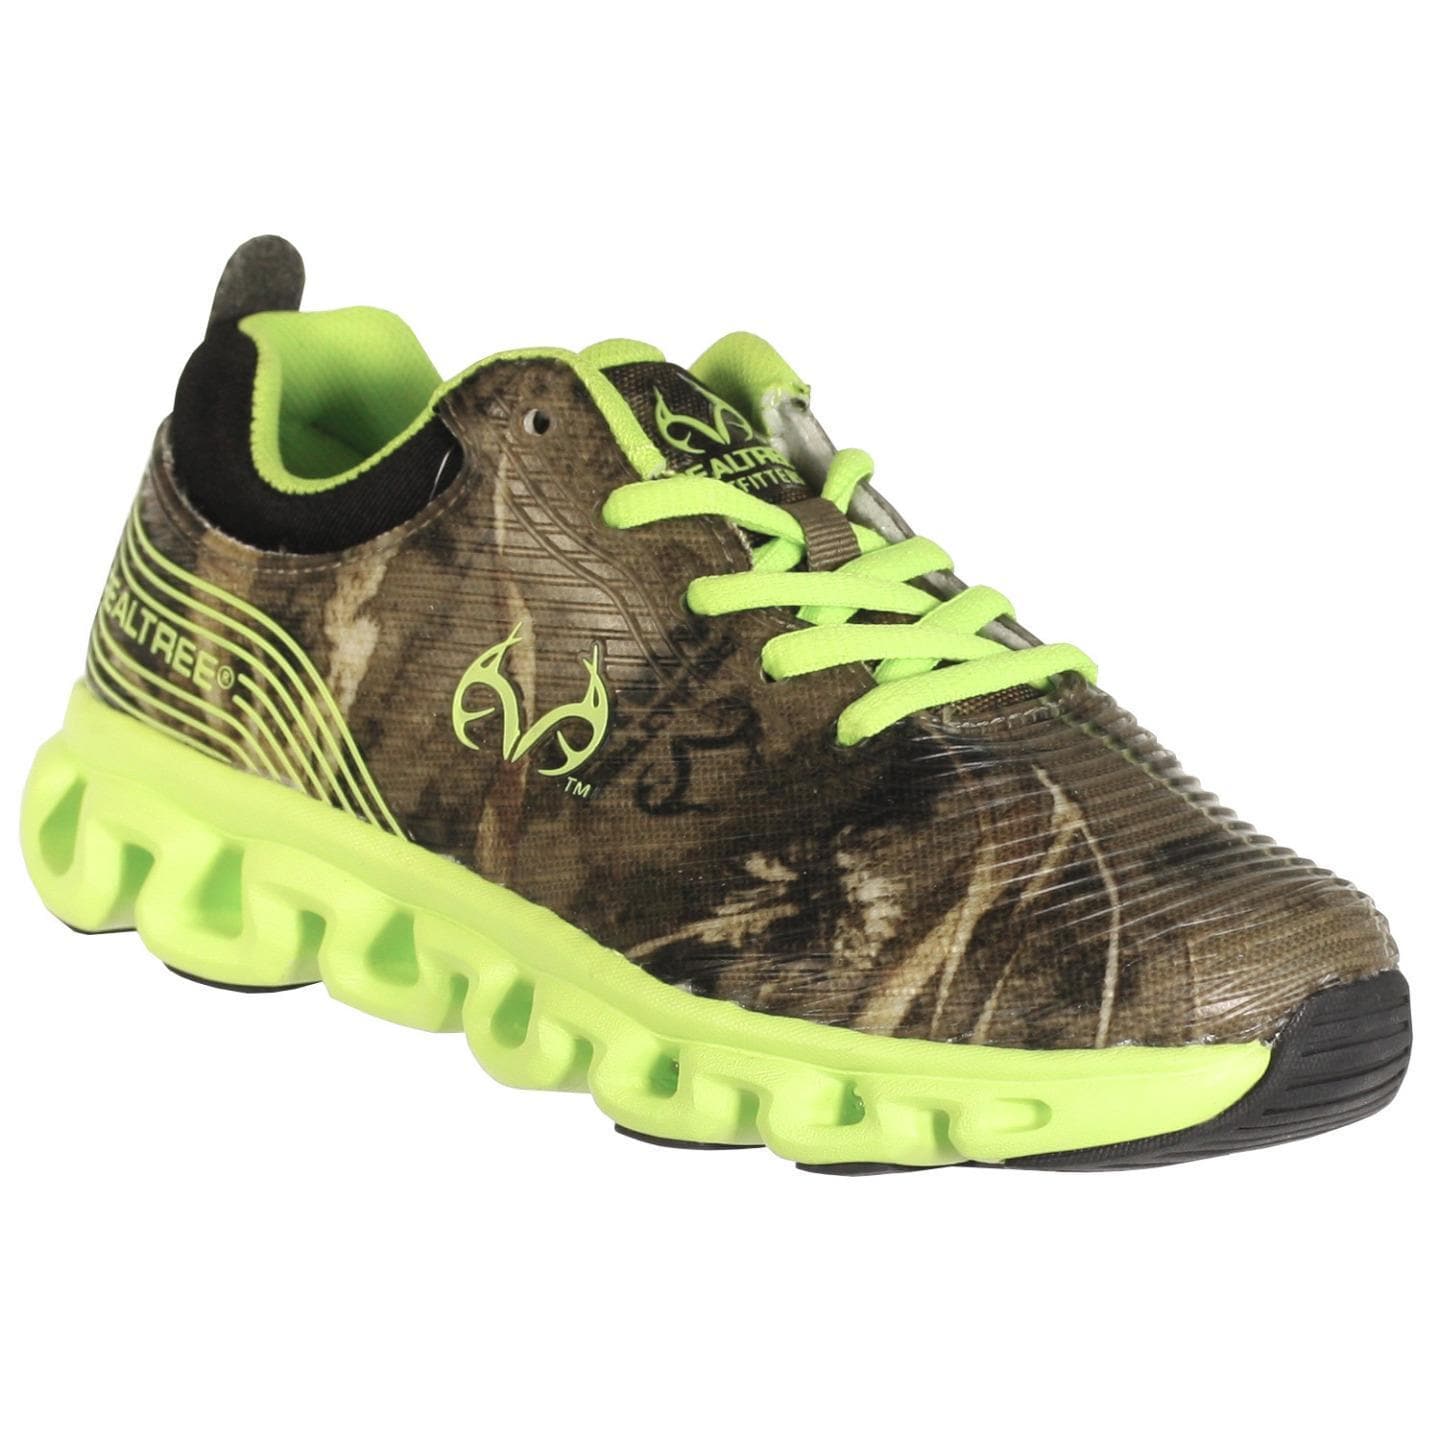 realtree tennis shoes